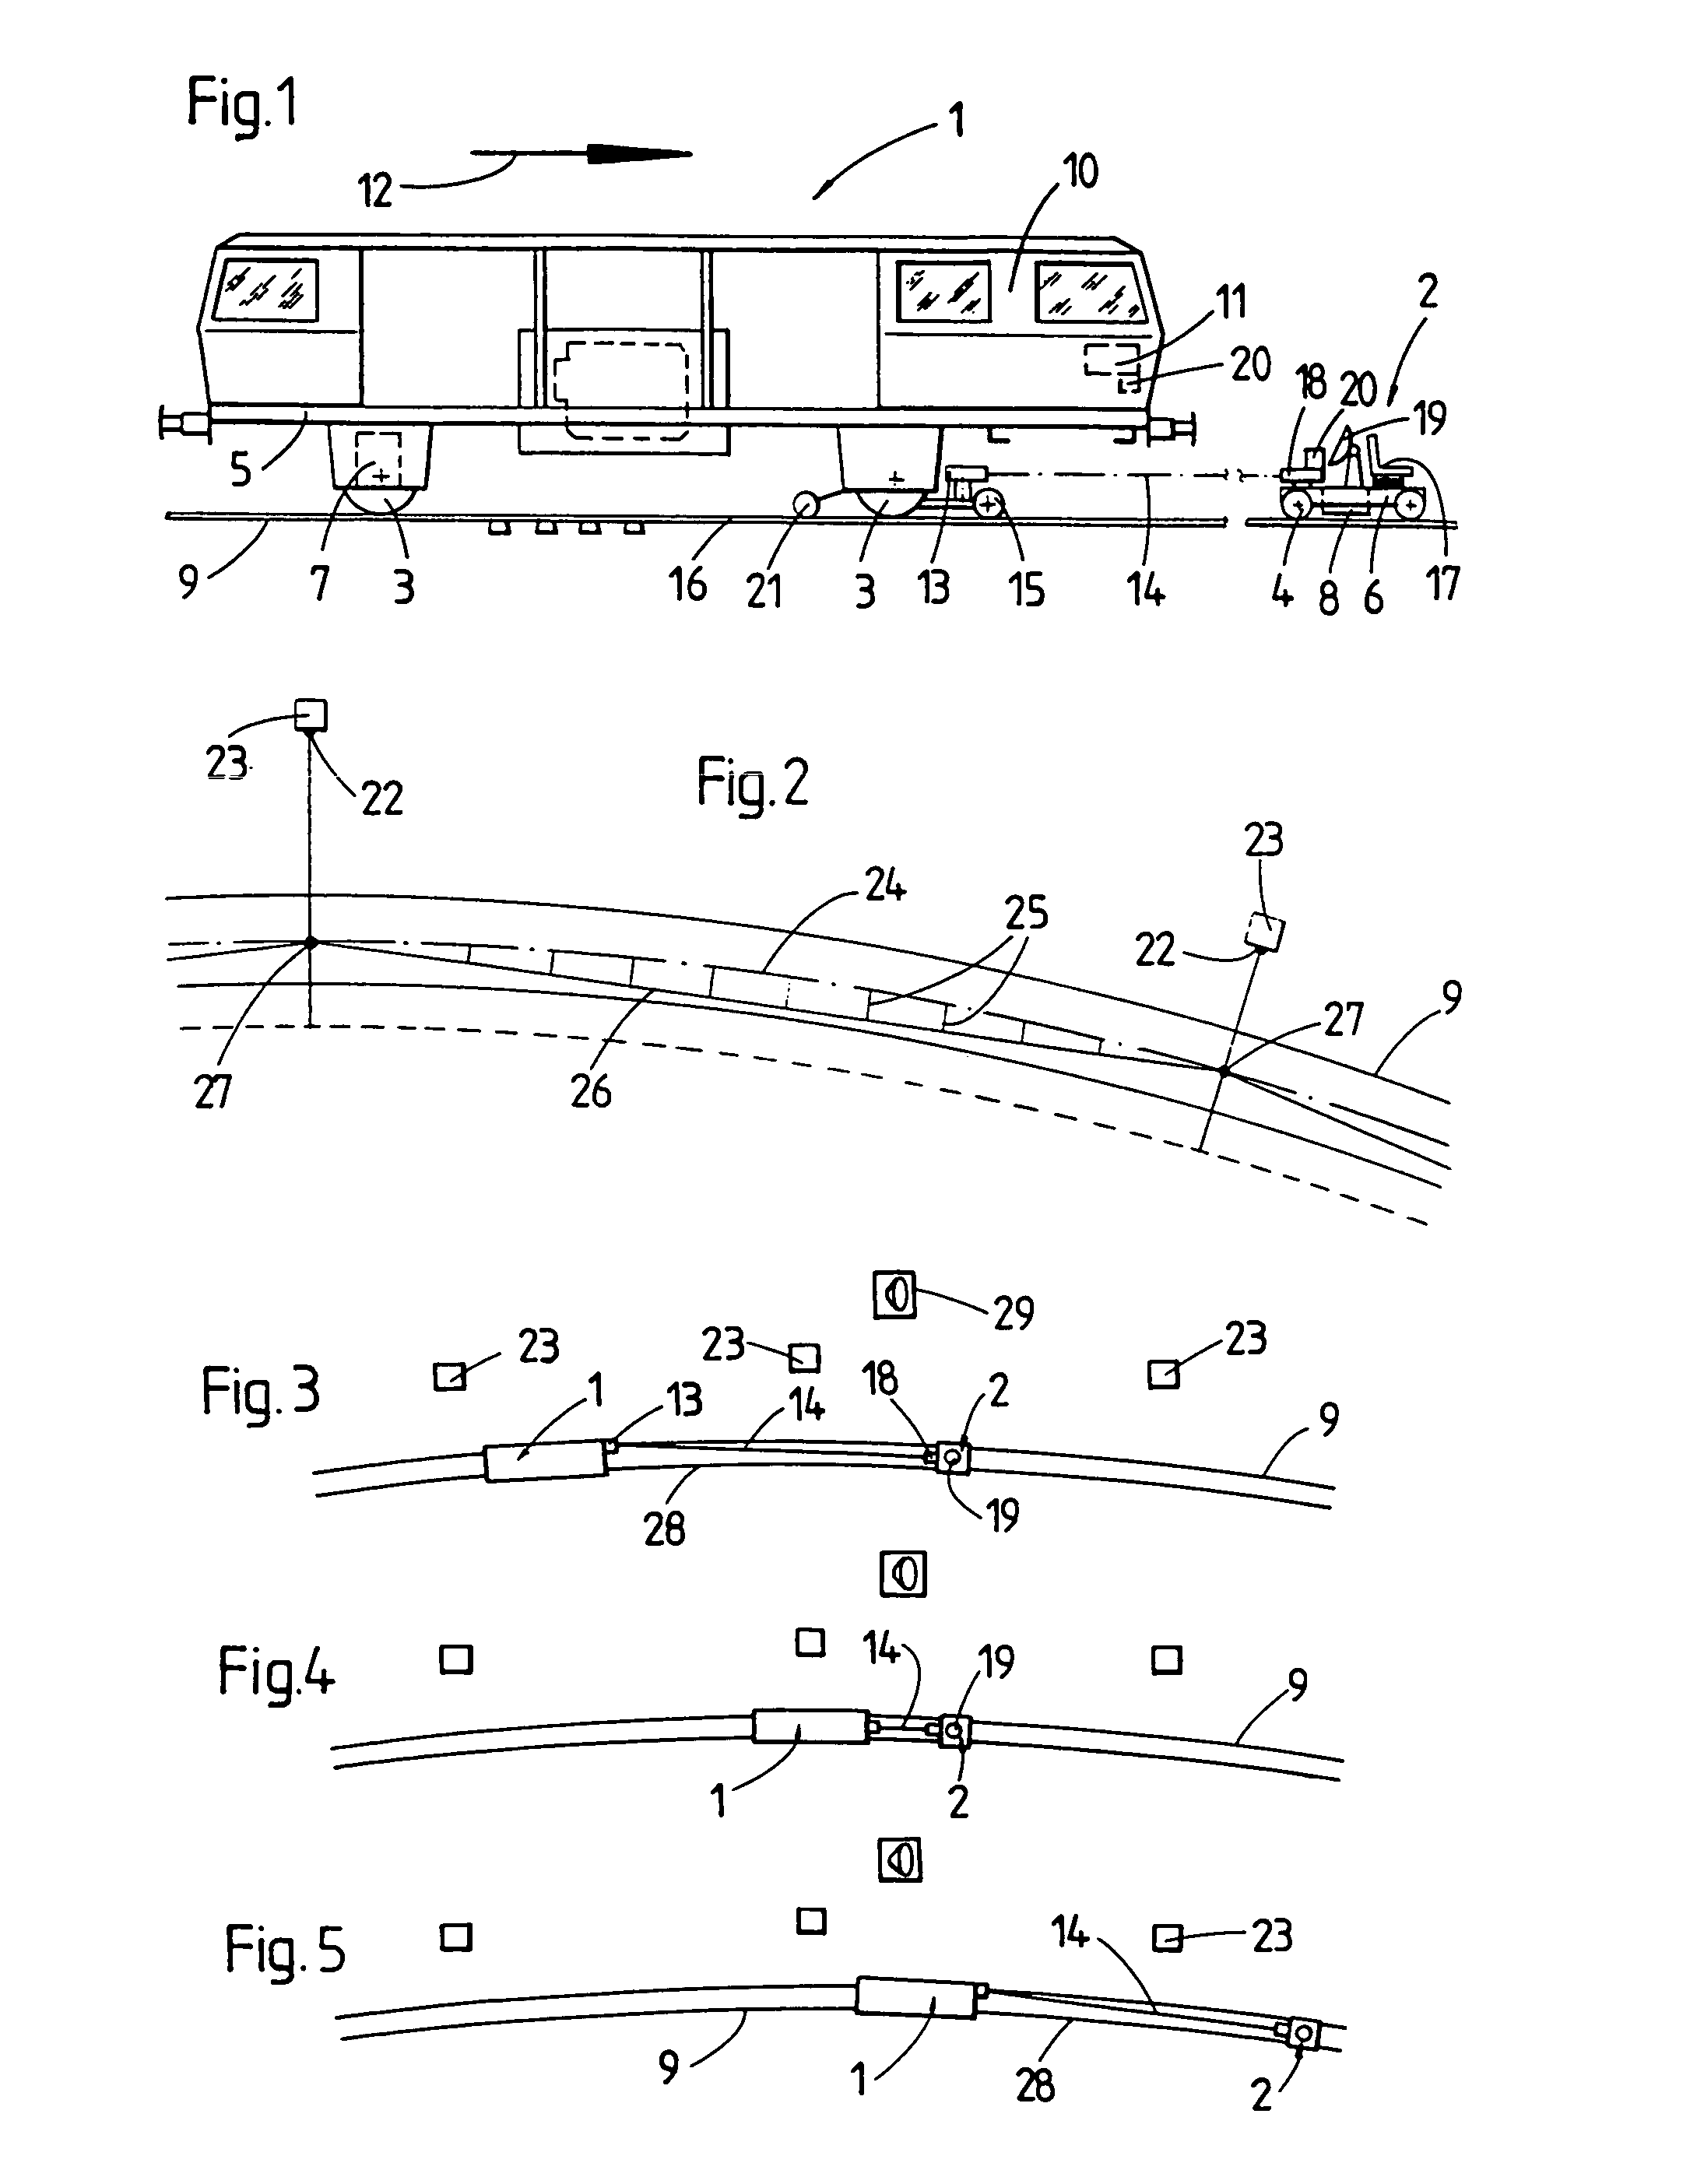 Method of surveying a track